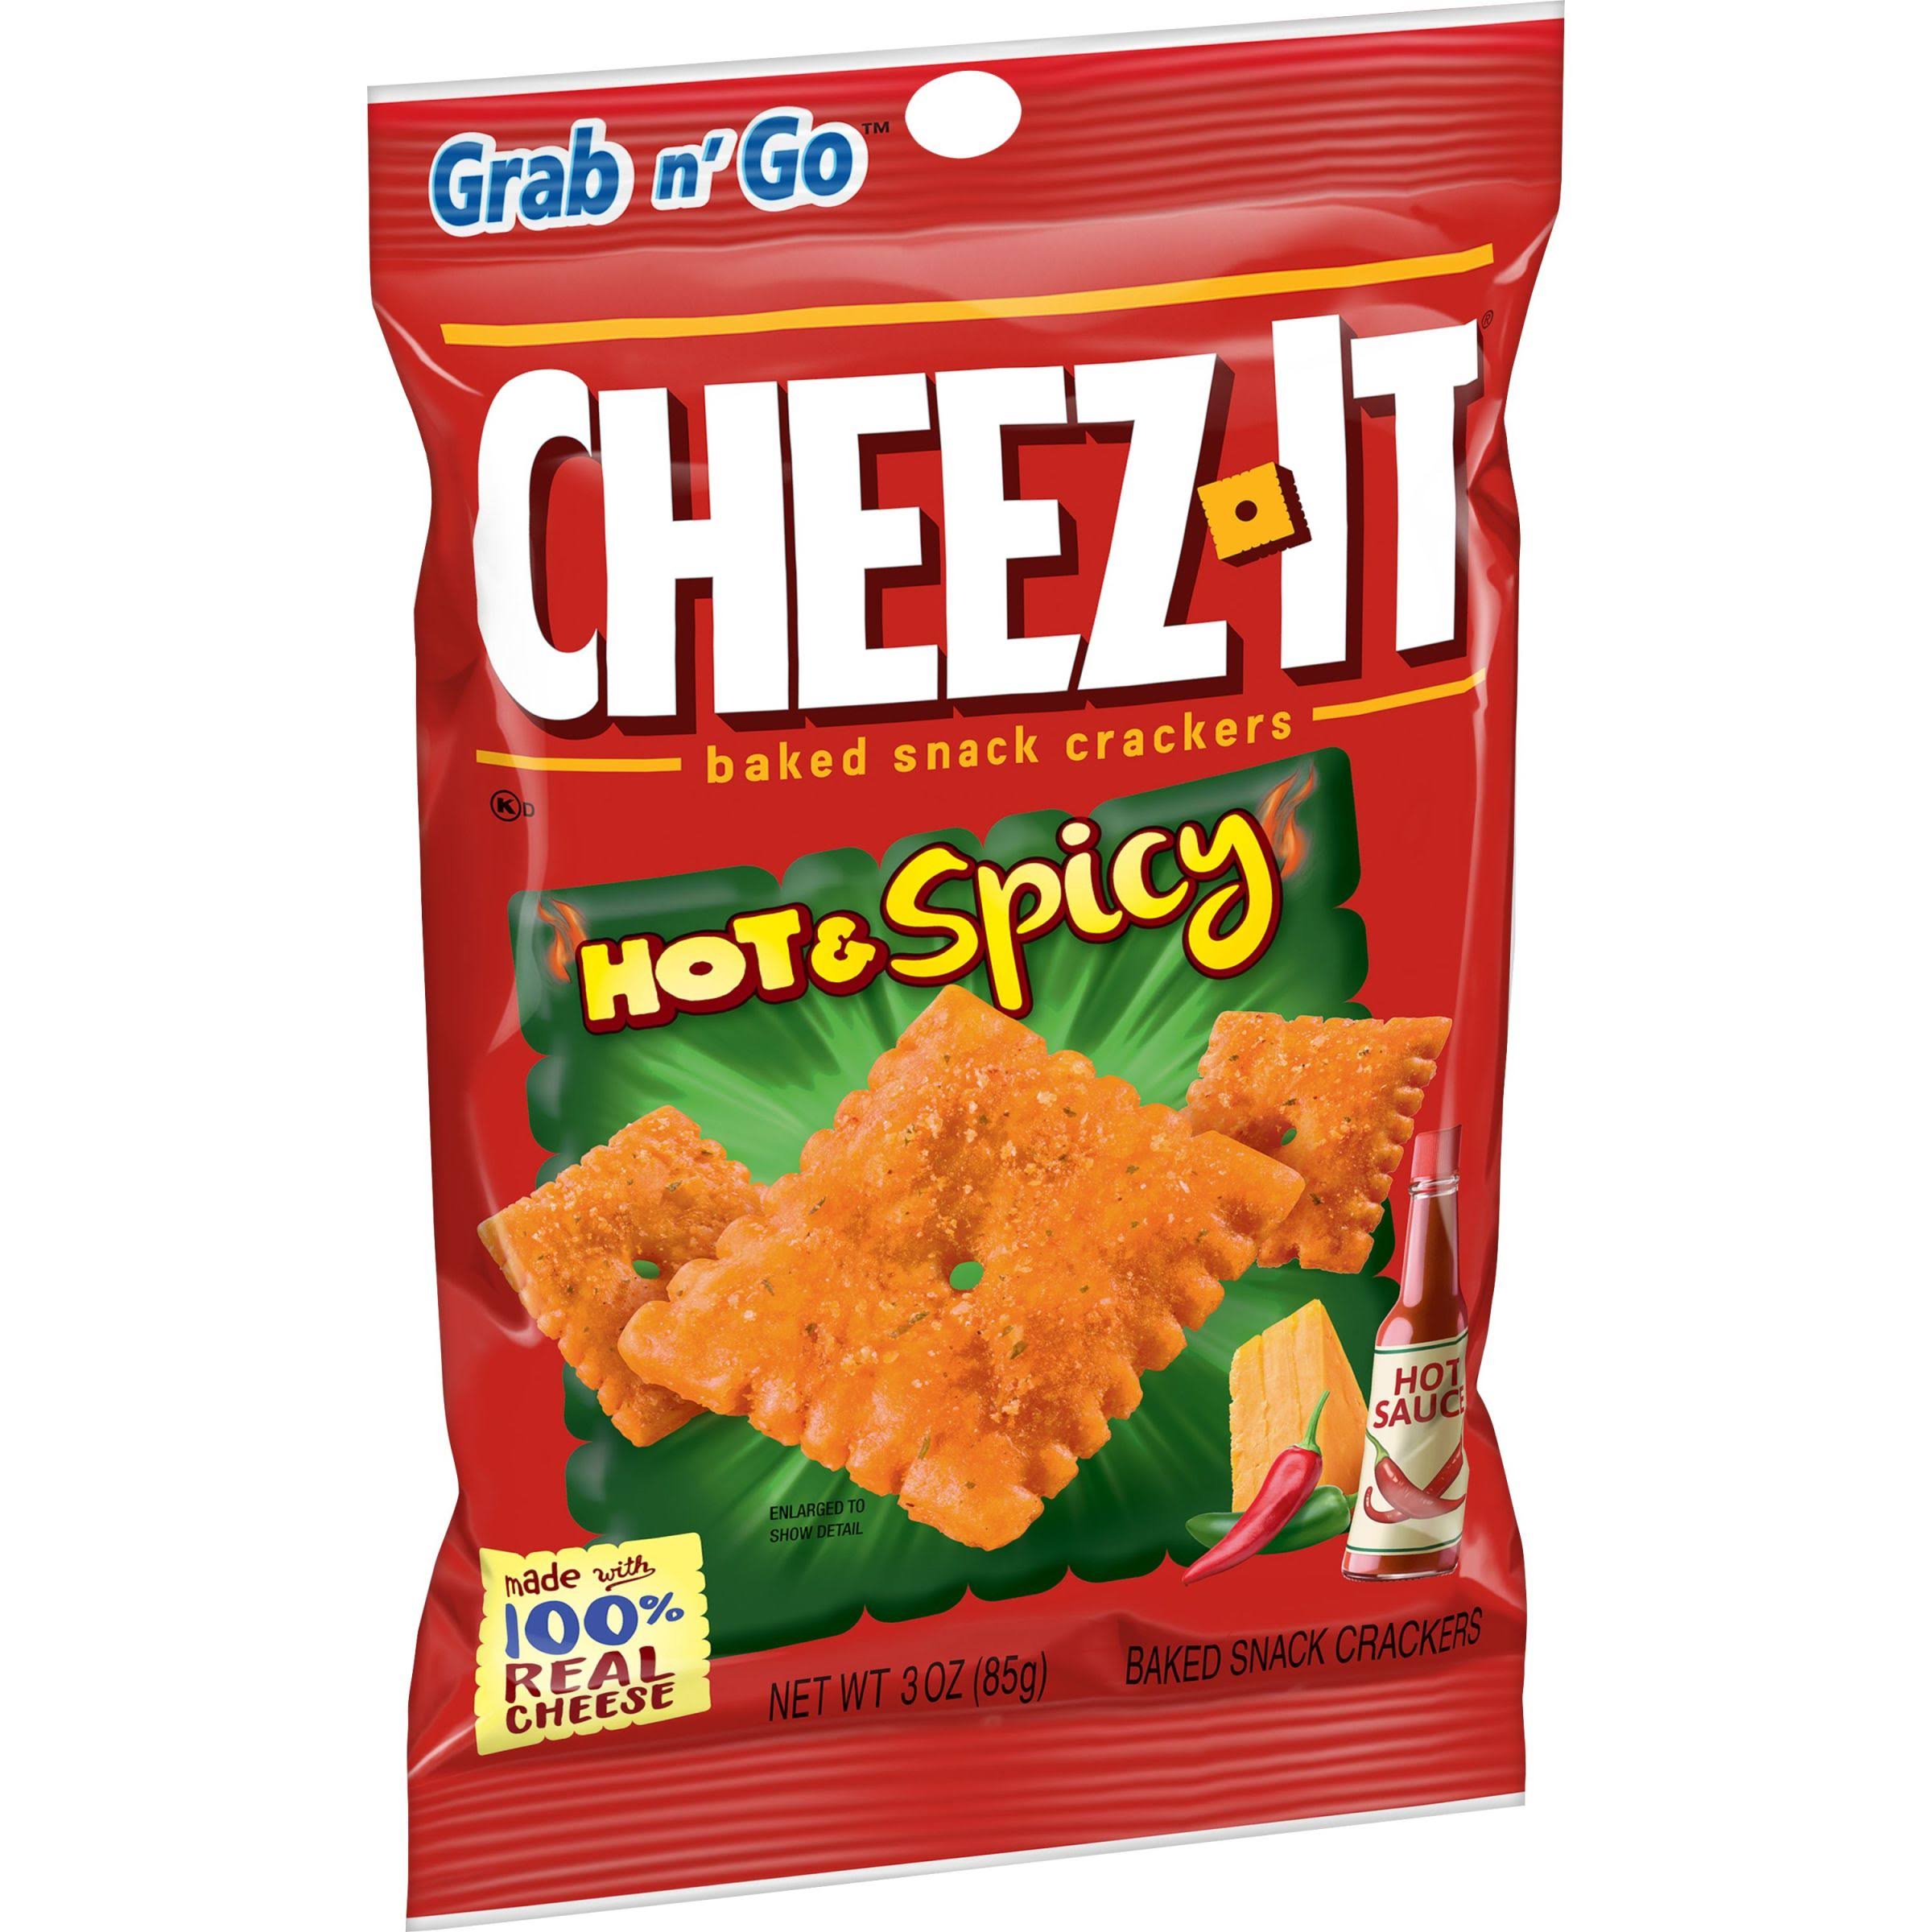 Cheez-It Baked Snack Cheese Crackers, Hot & Spicy, Grab 'n' Go, 3 oz B